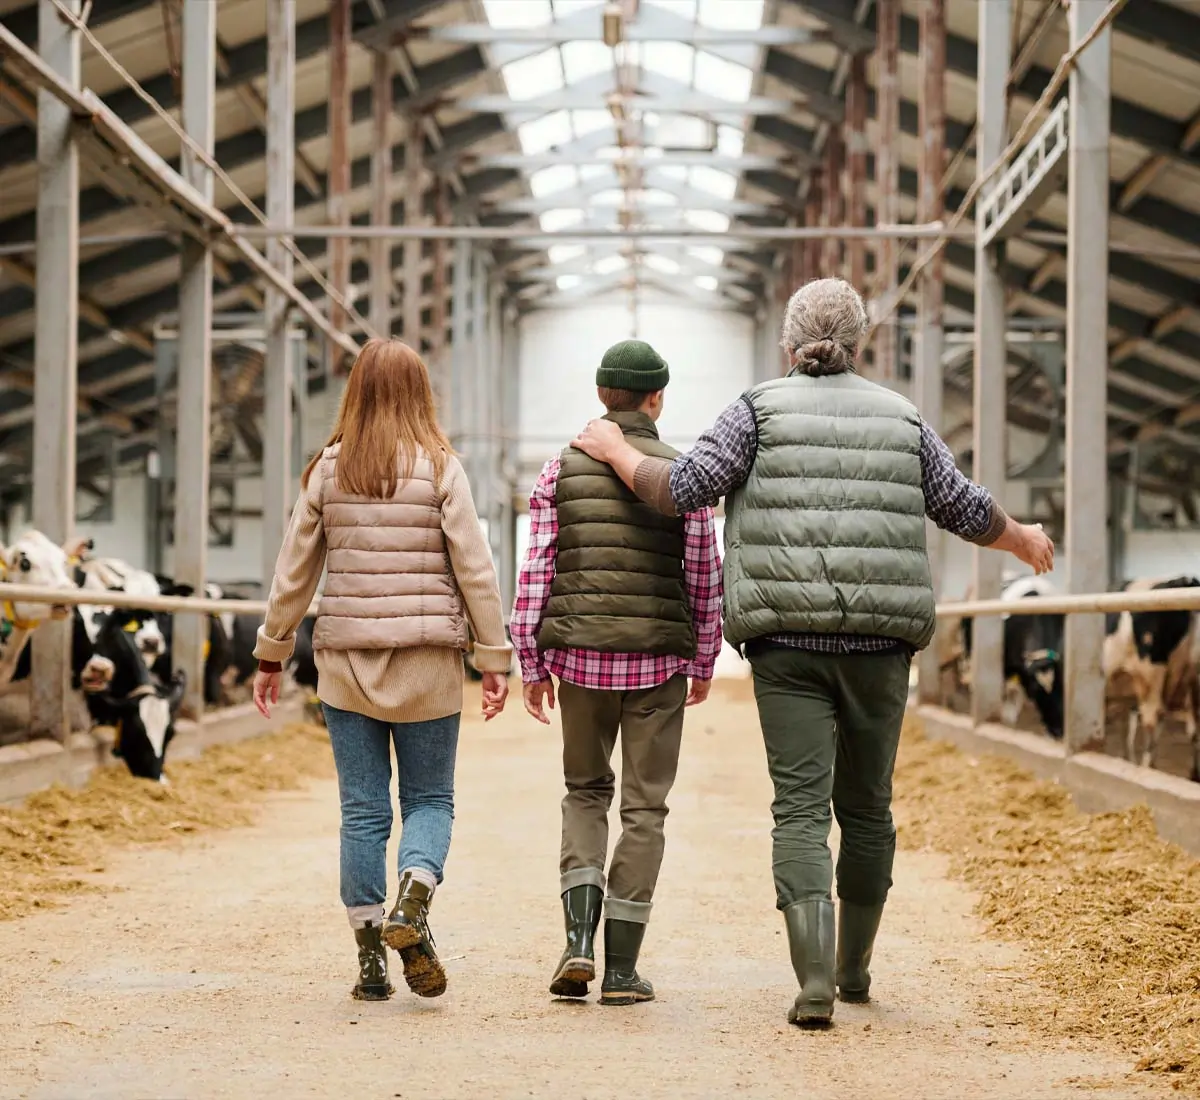 Three farmers walking in a large barn with dairy cows.